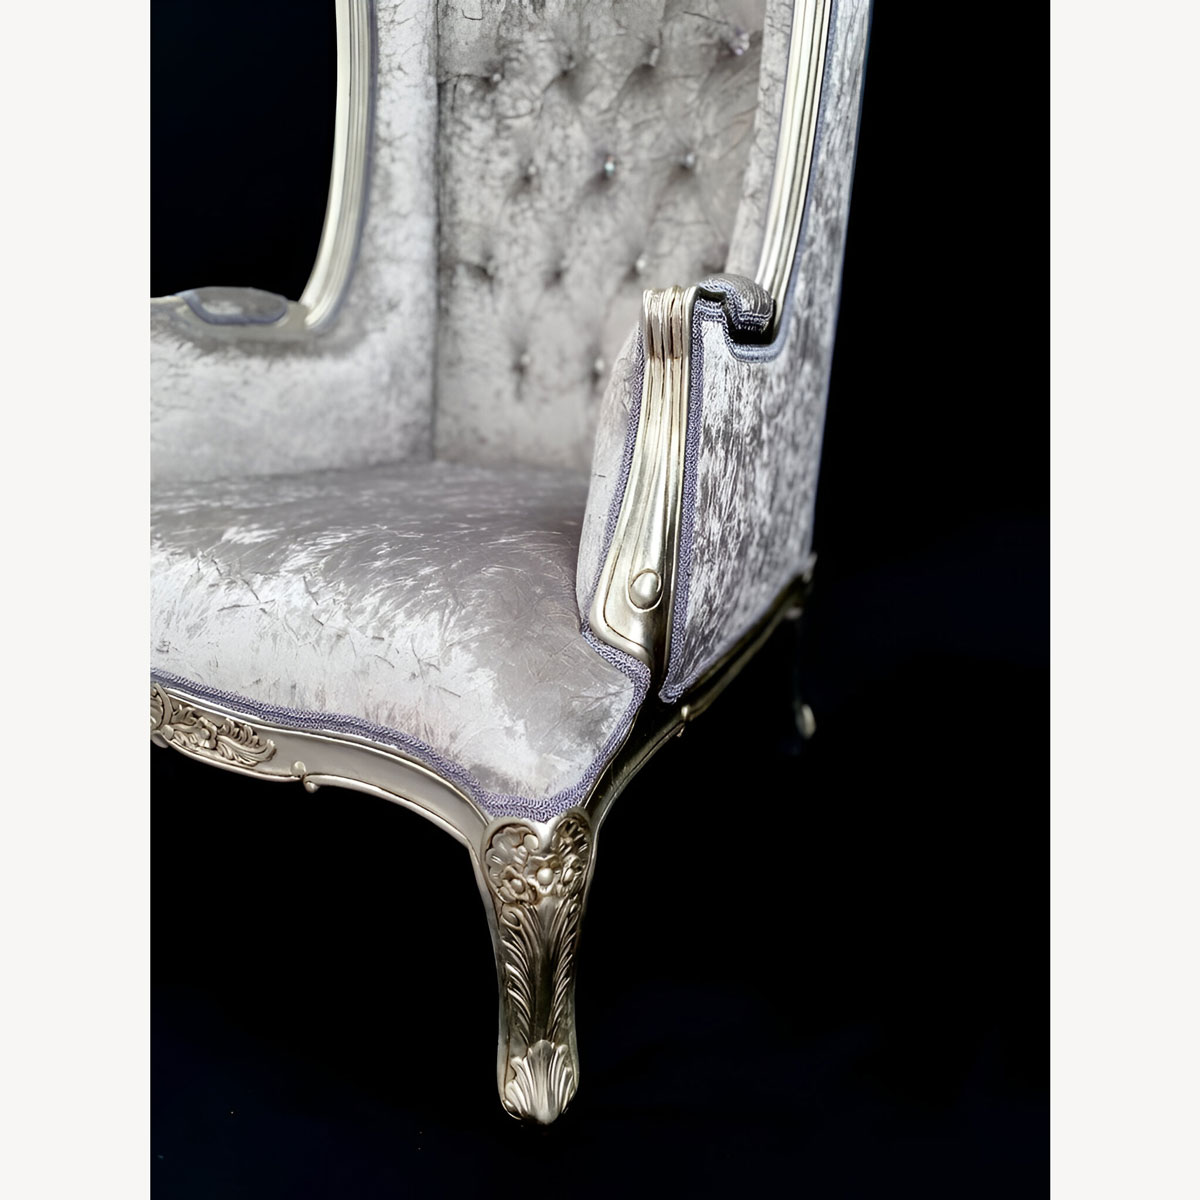 Silver Leaf Ornate Feature High Back Porters Arm Throne Chair In Silver Grey Crushed Velvet Crystal Buttons 3 - Hampshire Barn Interiors - Silver Leaf Ornate Feature High Back Porters Arm Throne Chair In Silver Grey Crushed Velvet Crystal Buttons -